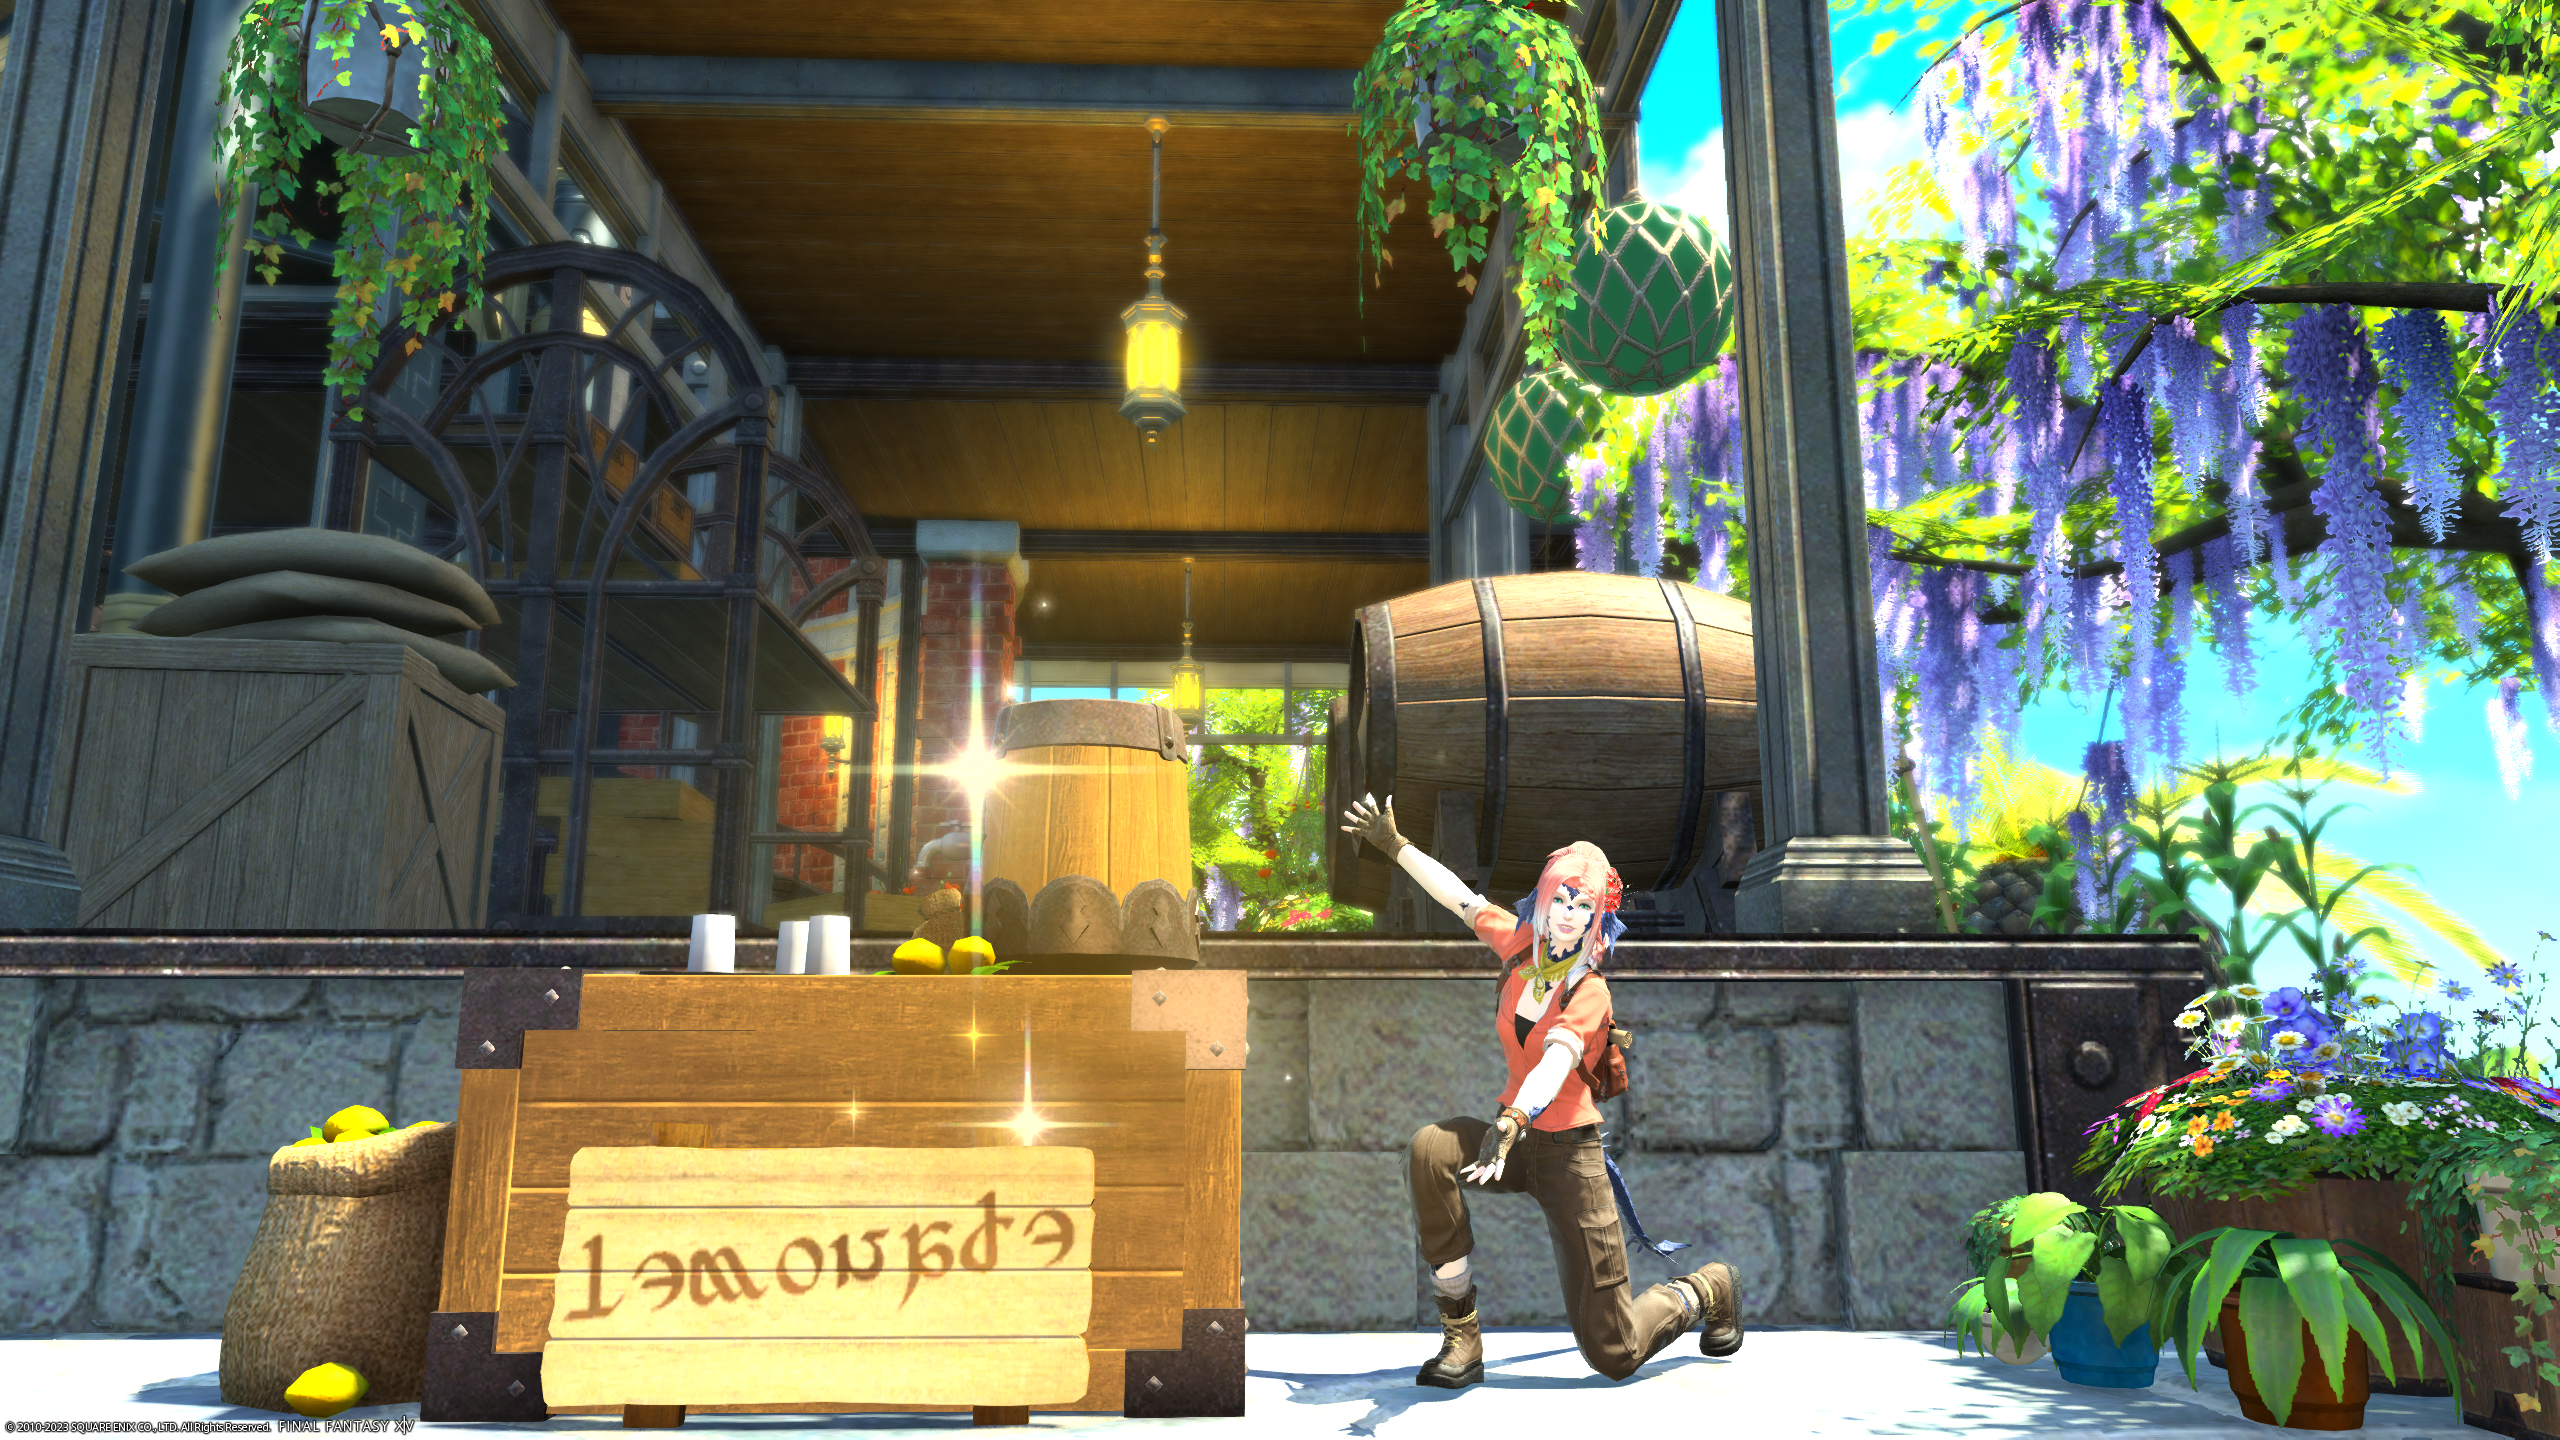 A screenshot from FFXIV. It depicts a character showing off a lemonade stand in front of a what appears to be an open air storage facility.